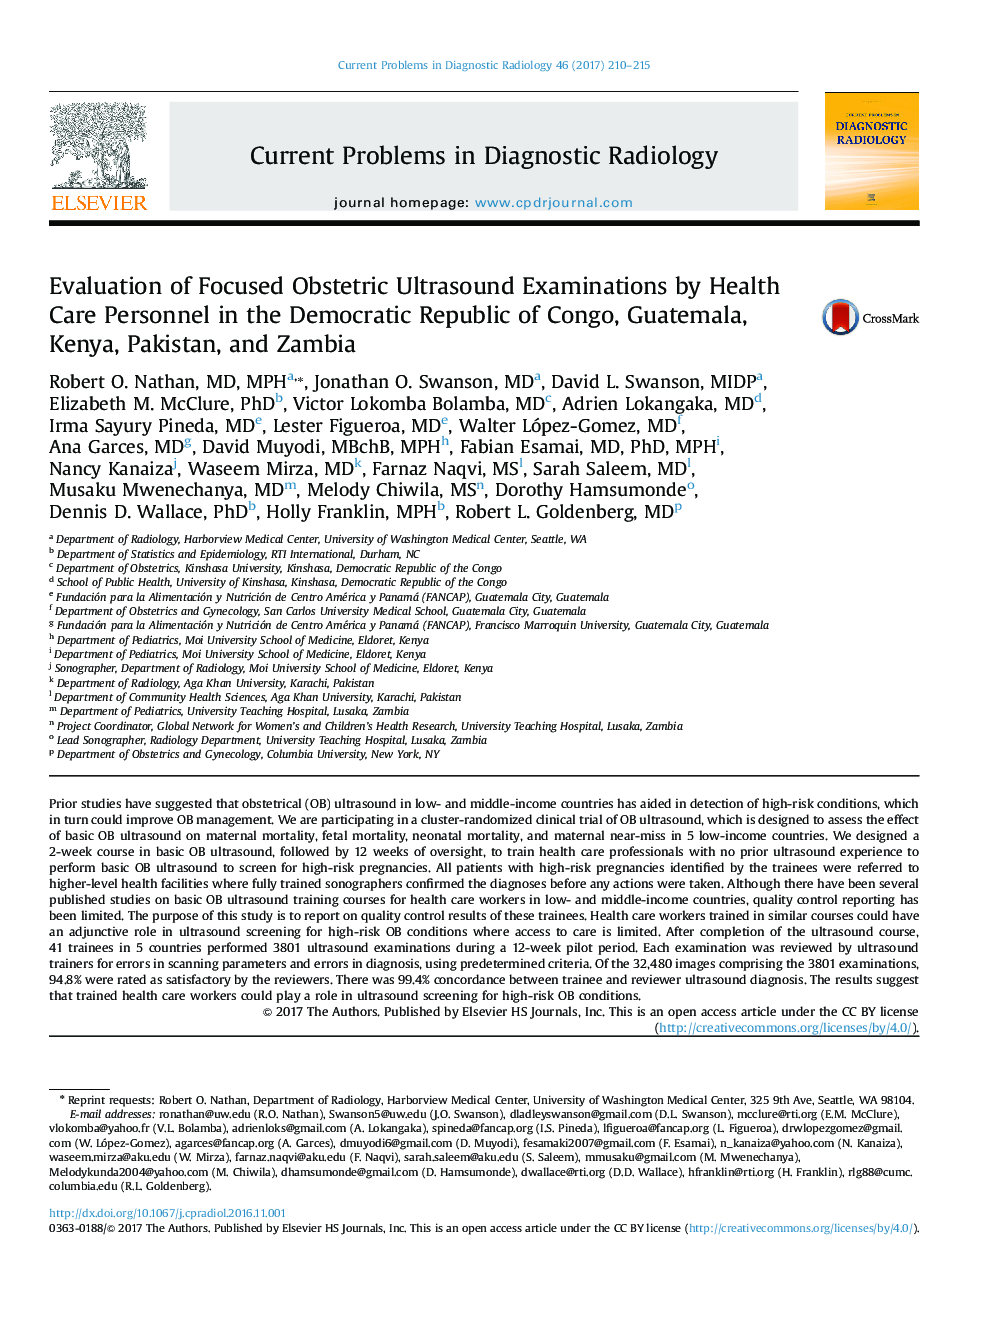 Evaluation of Focused Obstetric Ultrasound Examinations by Health Care Personnel in the Democratic Republic of Congo, Guatemala, Kenya, Pakistan, and Zambia